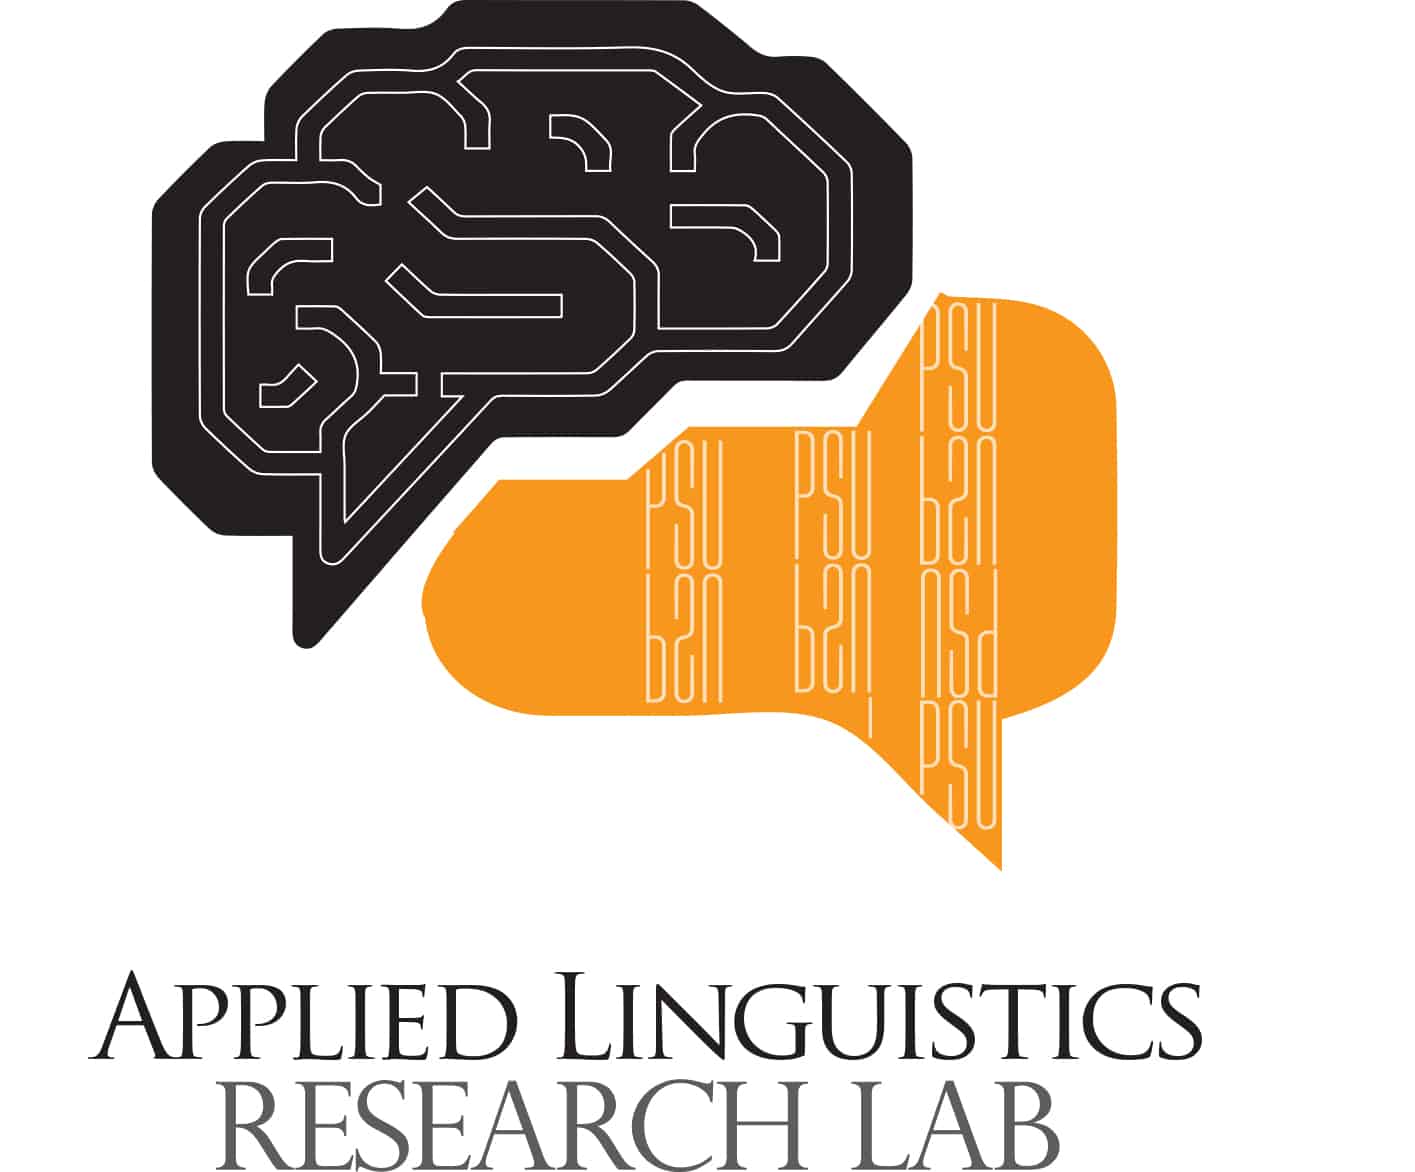 The Applied Linguistics Research Lab Holds a Seminar on “Discourse Analysis: The Use of Metadiscourse”